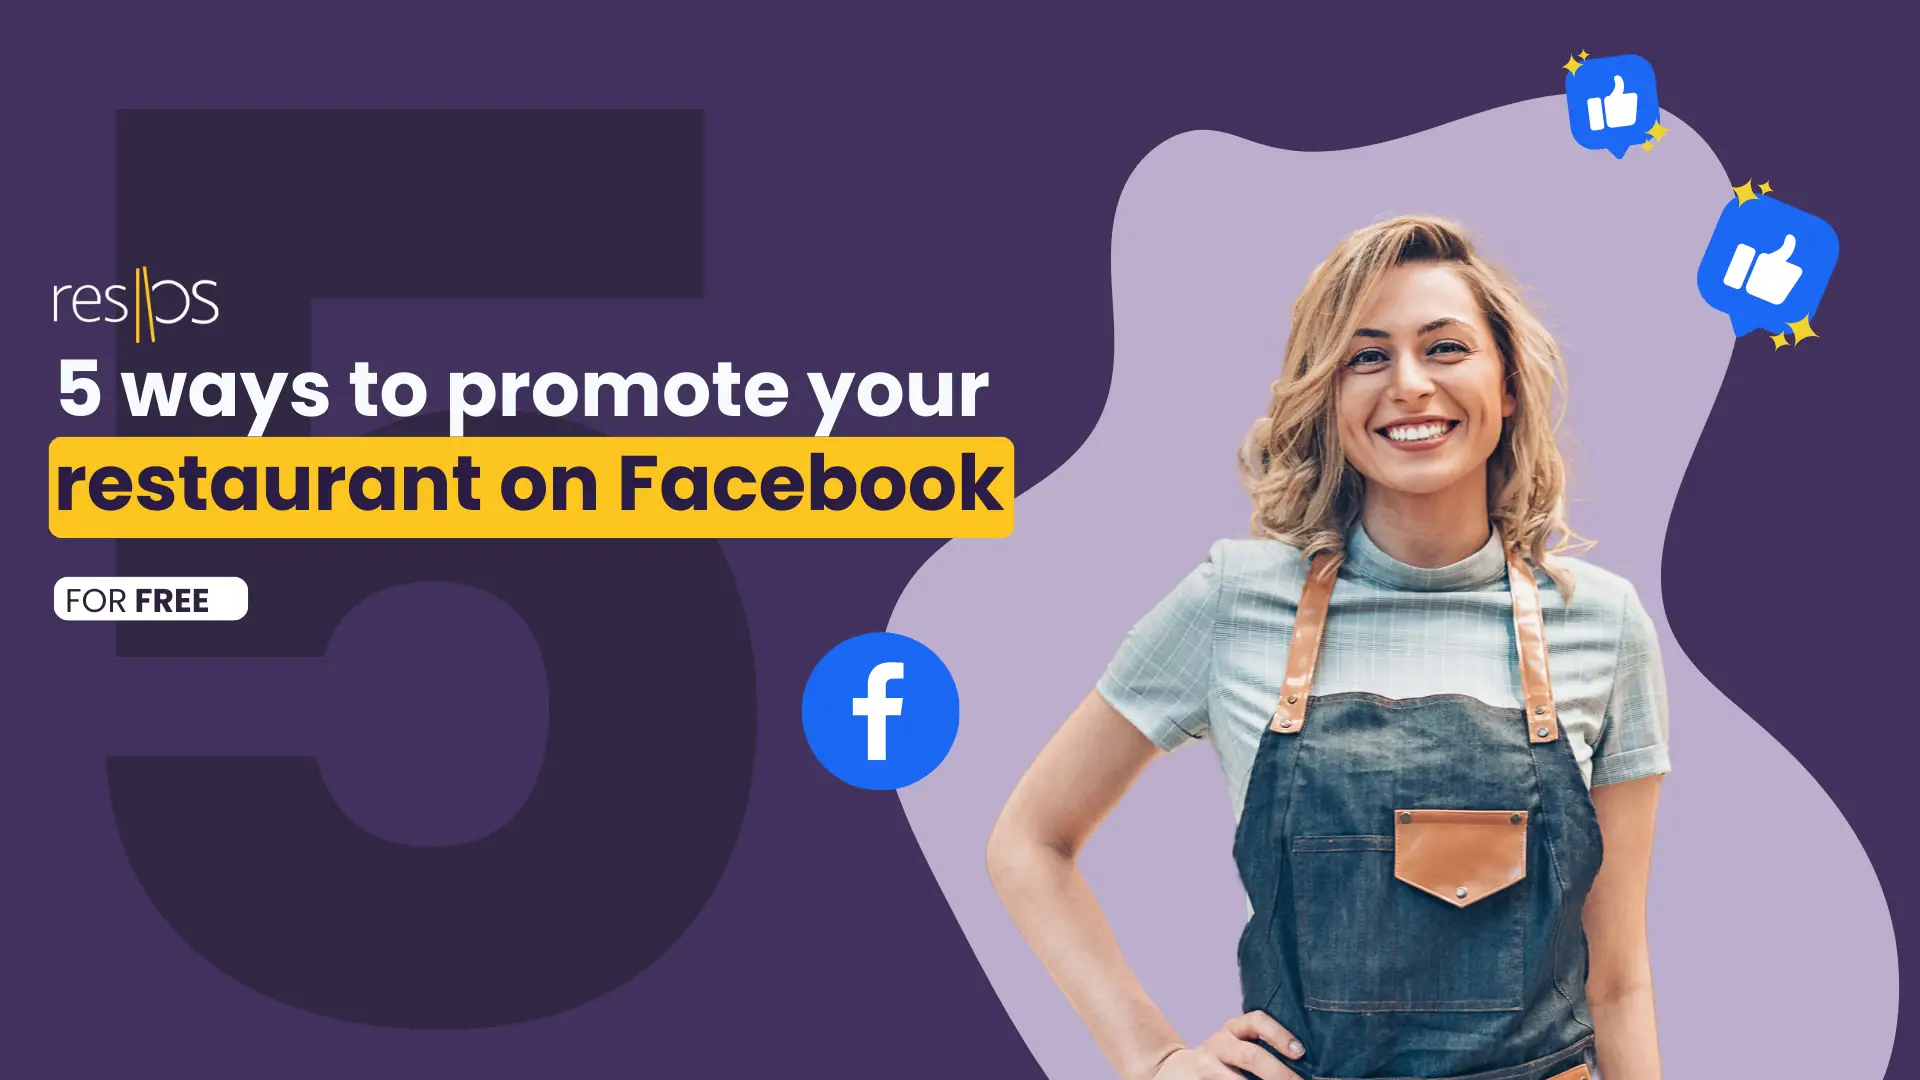 5 ways to promote your restaurant on Facebook (for free)